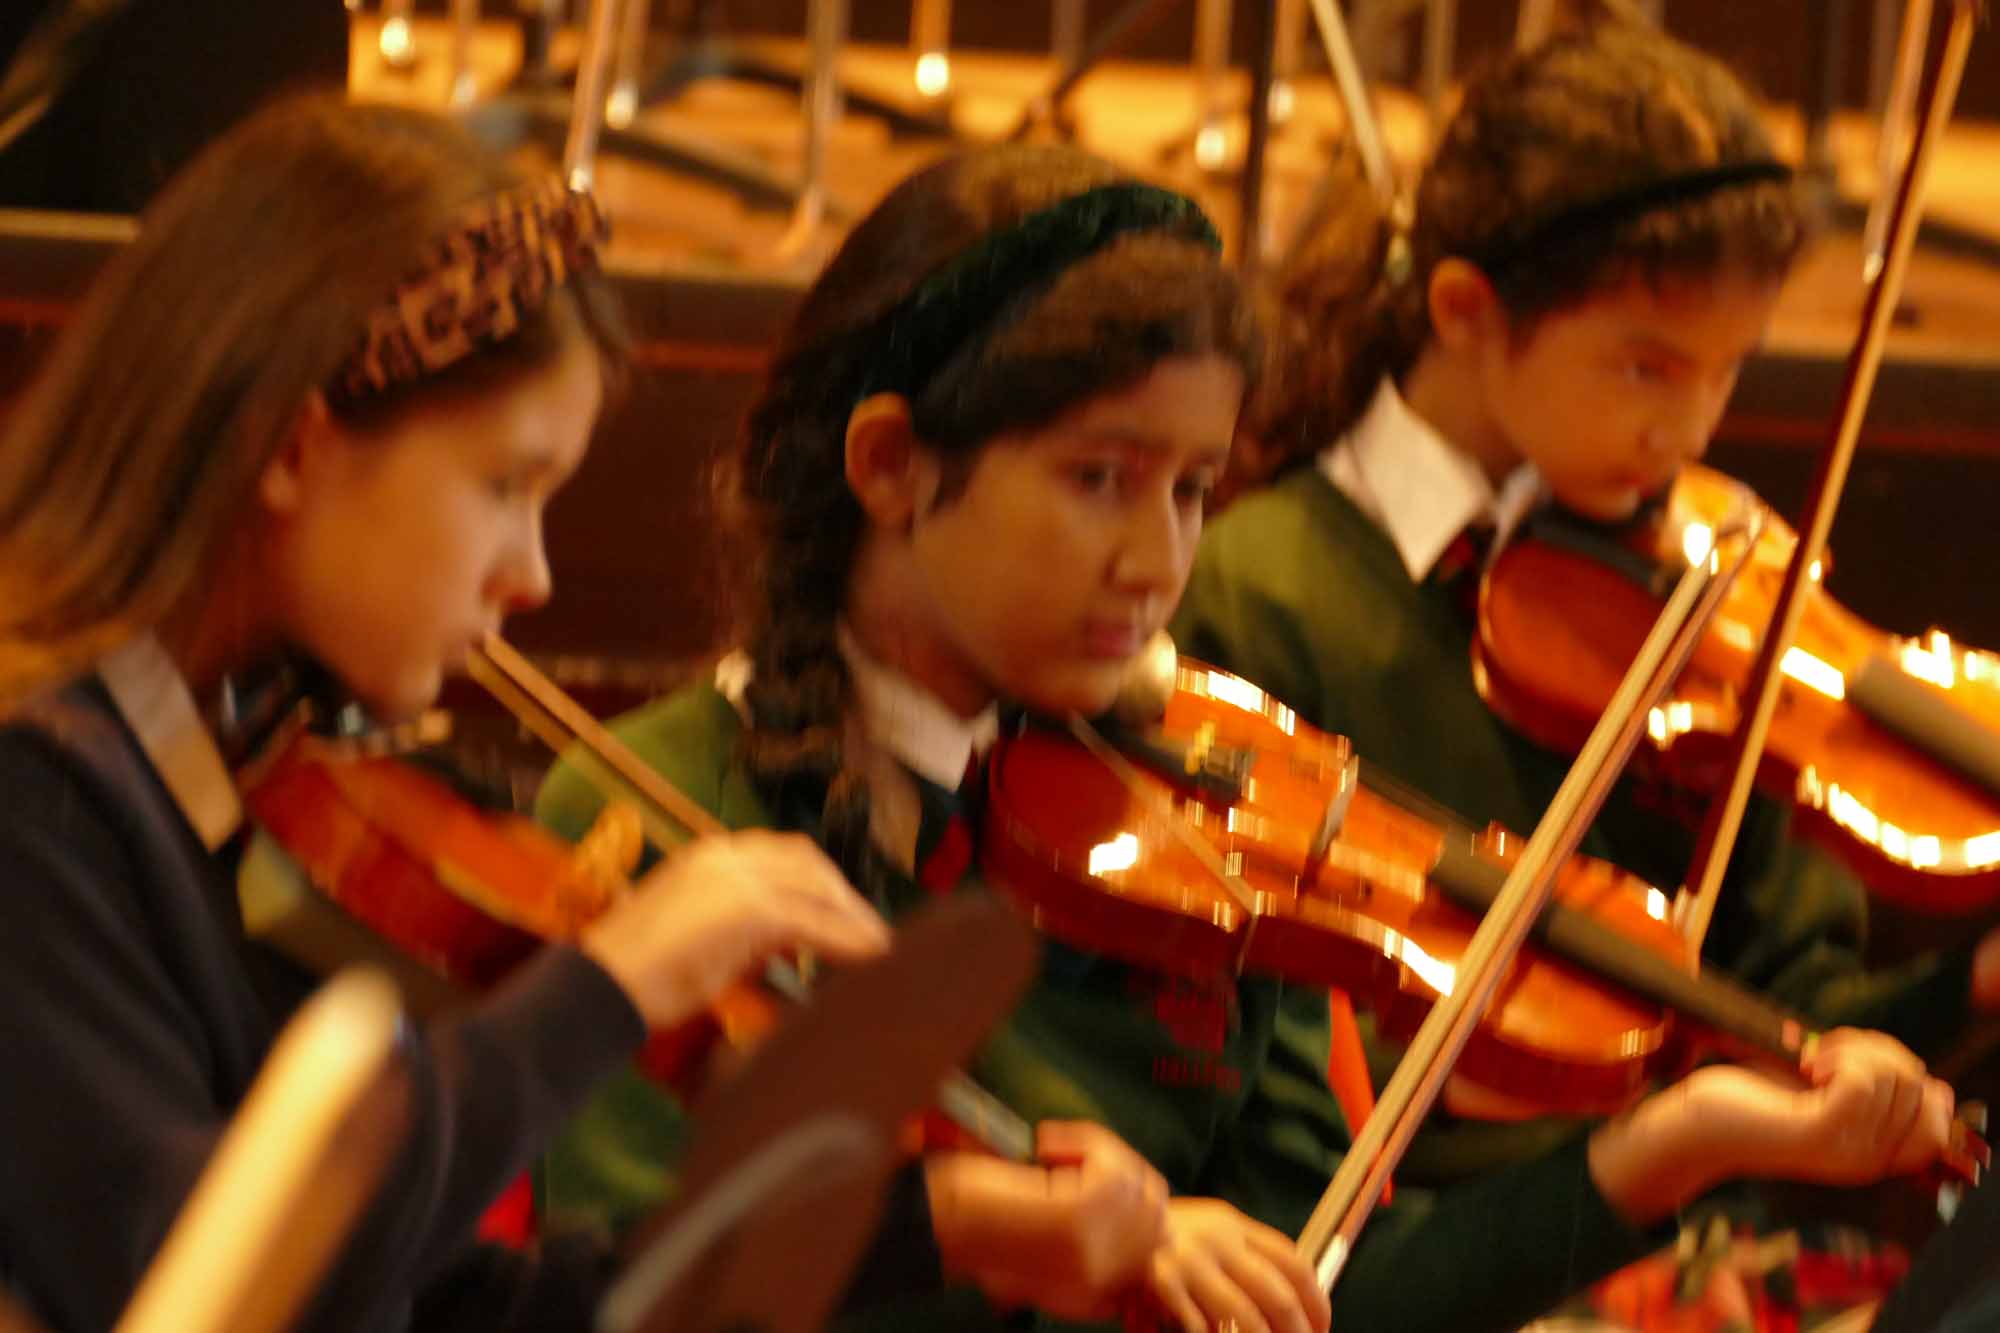 ESO Middle Schools' Orchestral Day - 30 September 2022